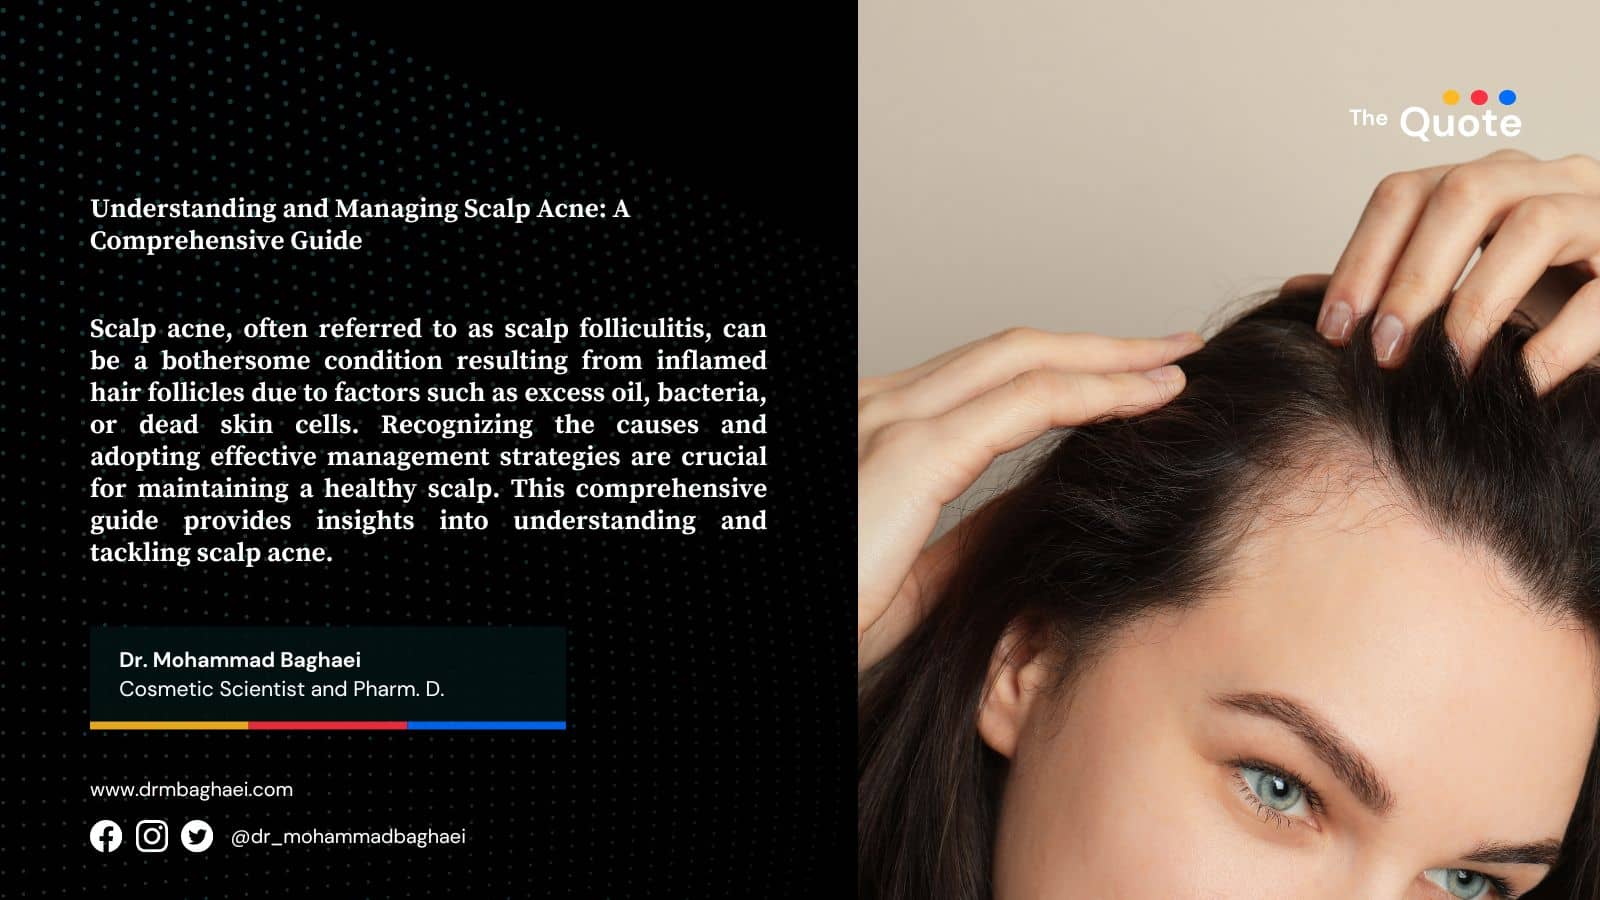 Understanding and Managing Scalp Acne: A Comprehensive Guide